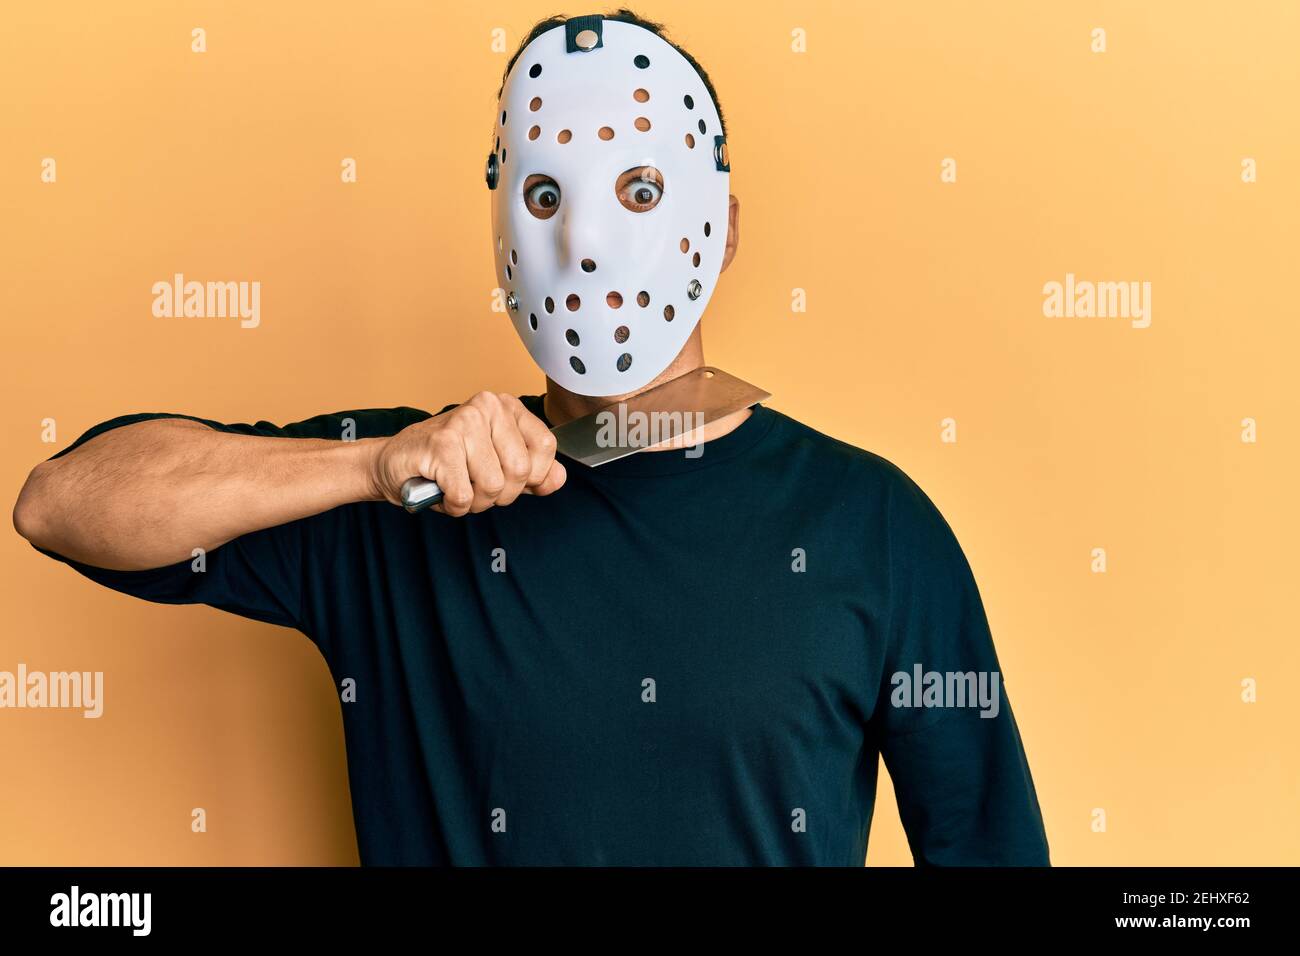 Man wearing hockey mask holding butcher knife looking dangerous and  threatening Stock Photo - Alamy